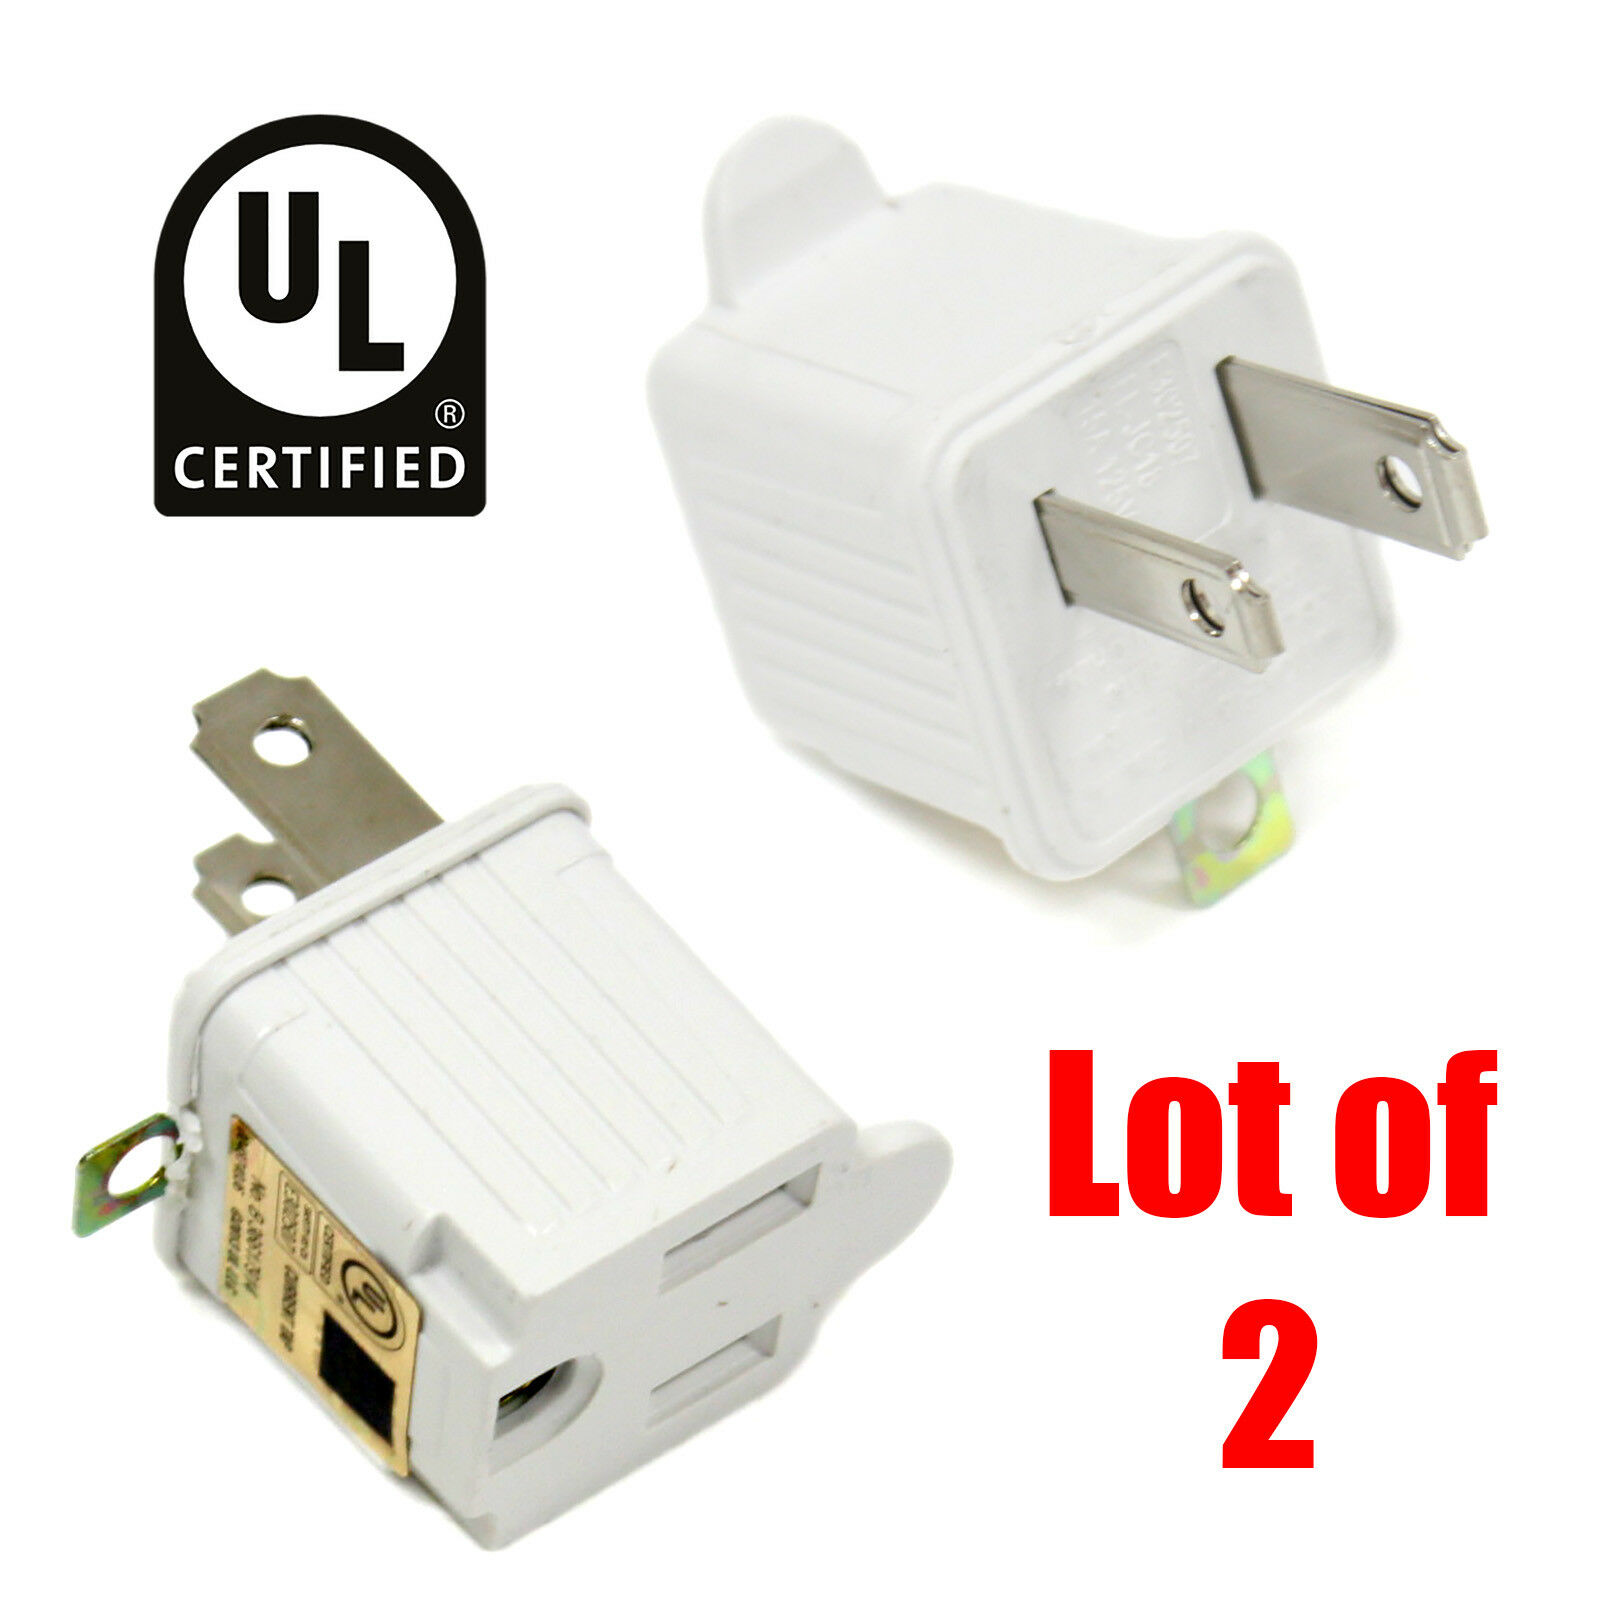 2 Lot3 to 2 Prong UL Certified Adapter AC Outlet Ground Converter Plug White 